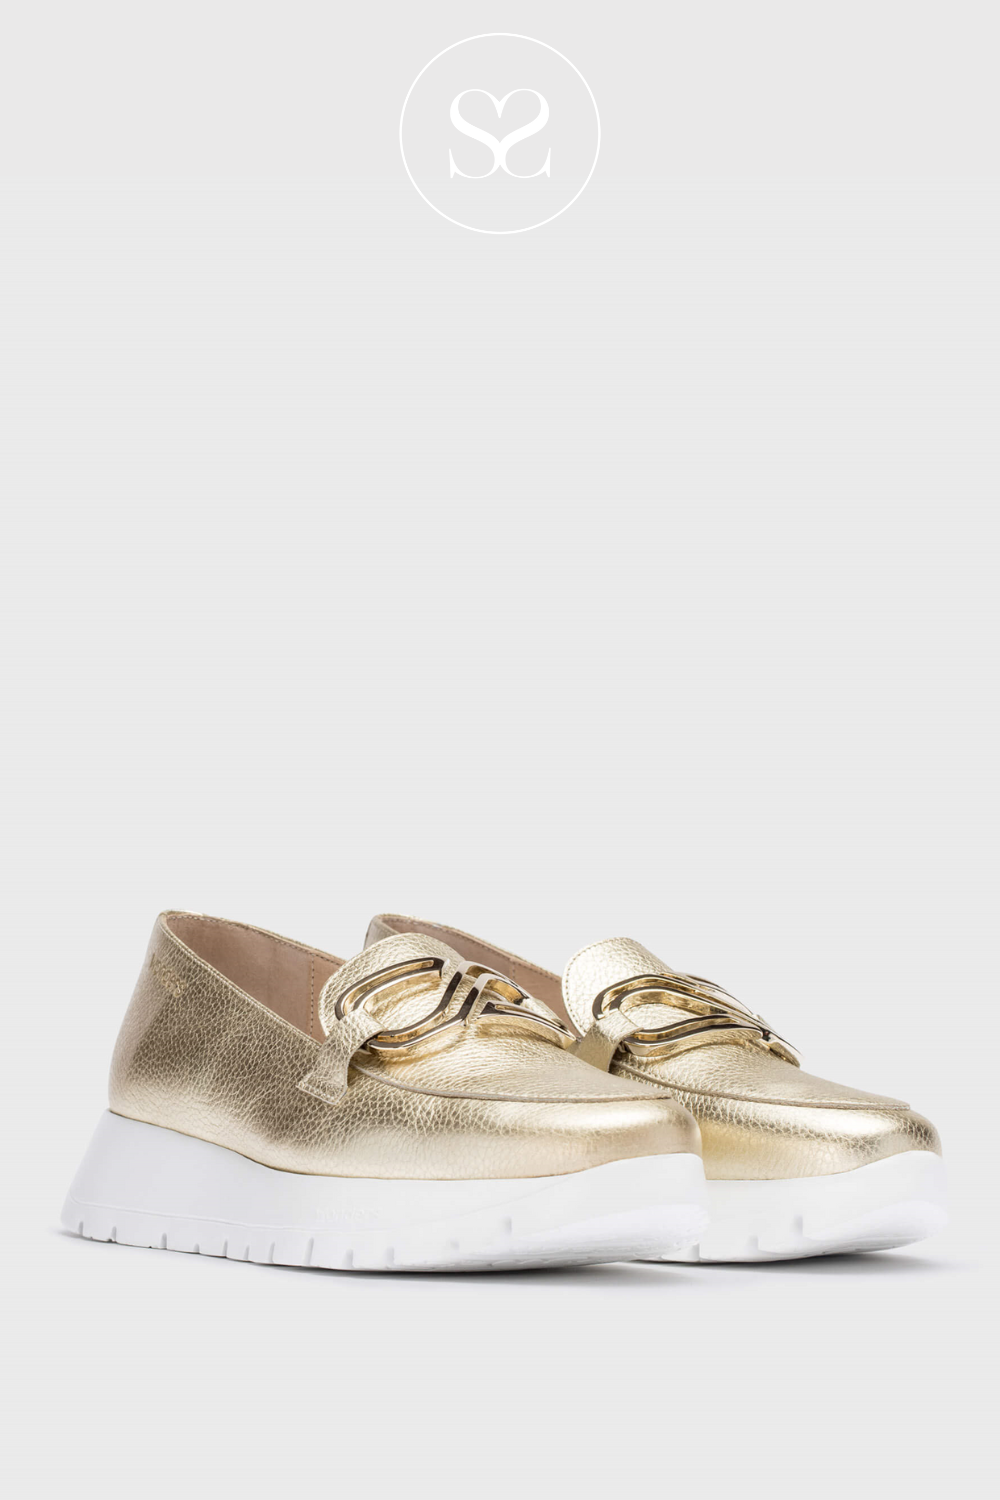 WONDERS A-2462 GOLD WEDGE SLIP ON SHOE WITH WHITE SOLE AND GOLD BUCKLE